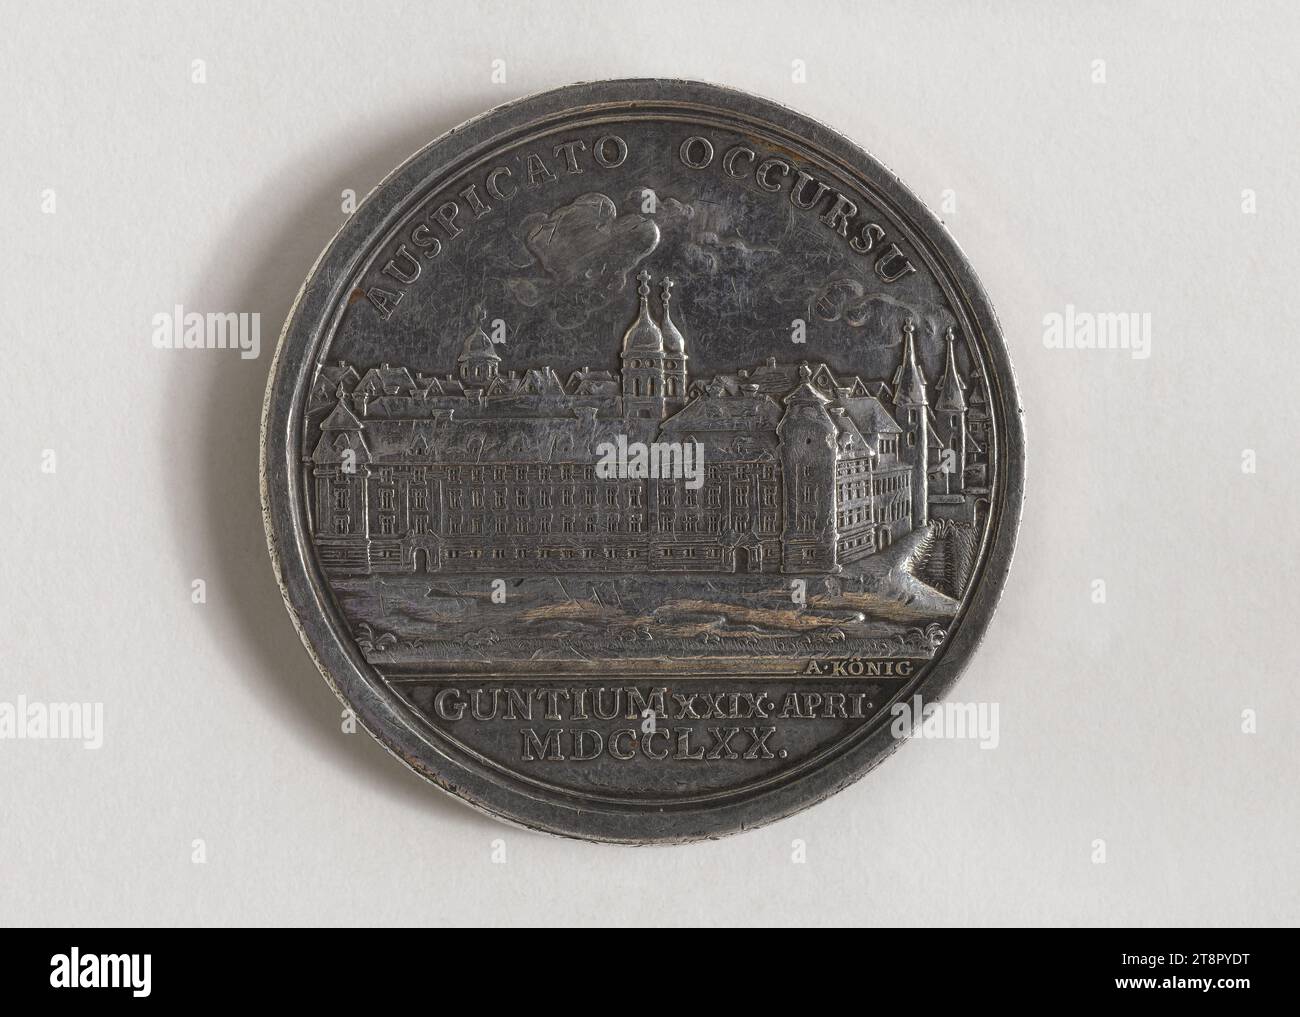 Marie-Antoinette's stay in Gunzburg, April 29, 1770, König, Anton Friedrich, Medal Engraver, Guillemard, A., Medal Engraver, Array, Numismatic, Medal, Dimensions - Work: Diameter: 4.4 cm, Weight (type size): 34.96 g Stock Photo